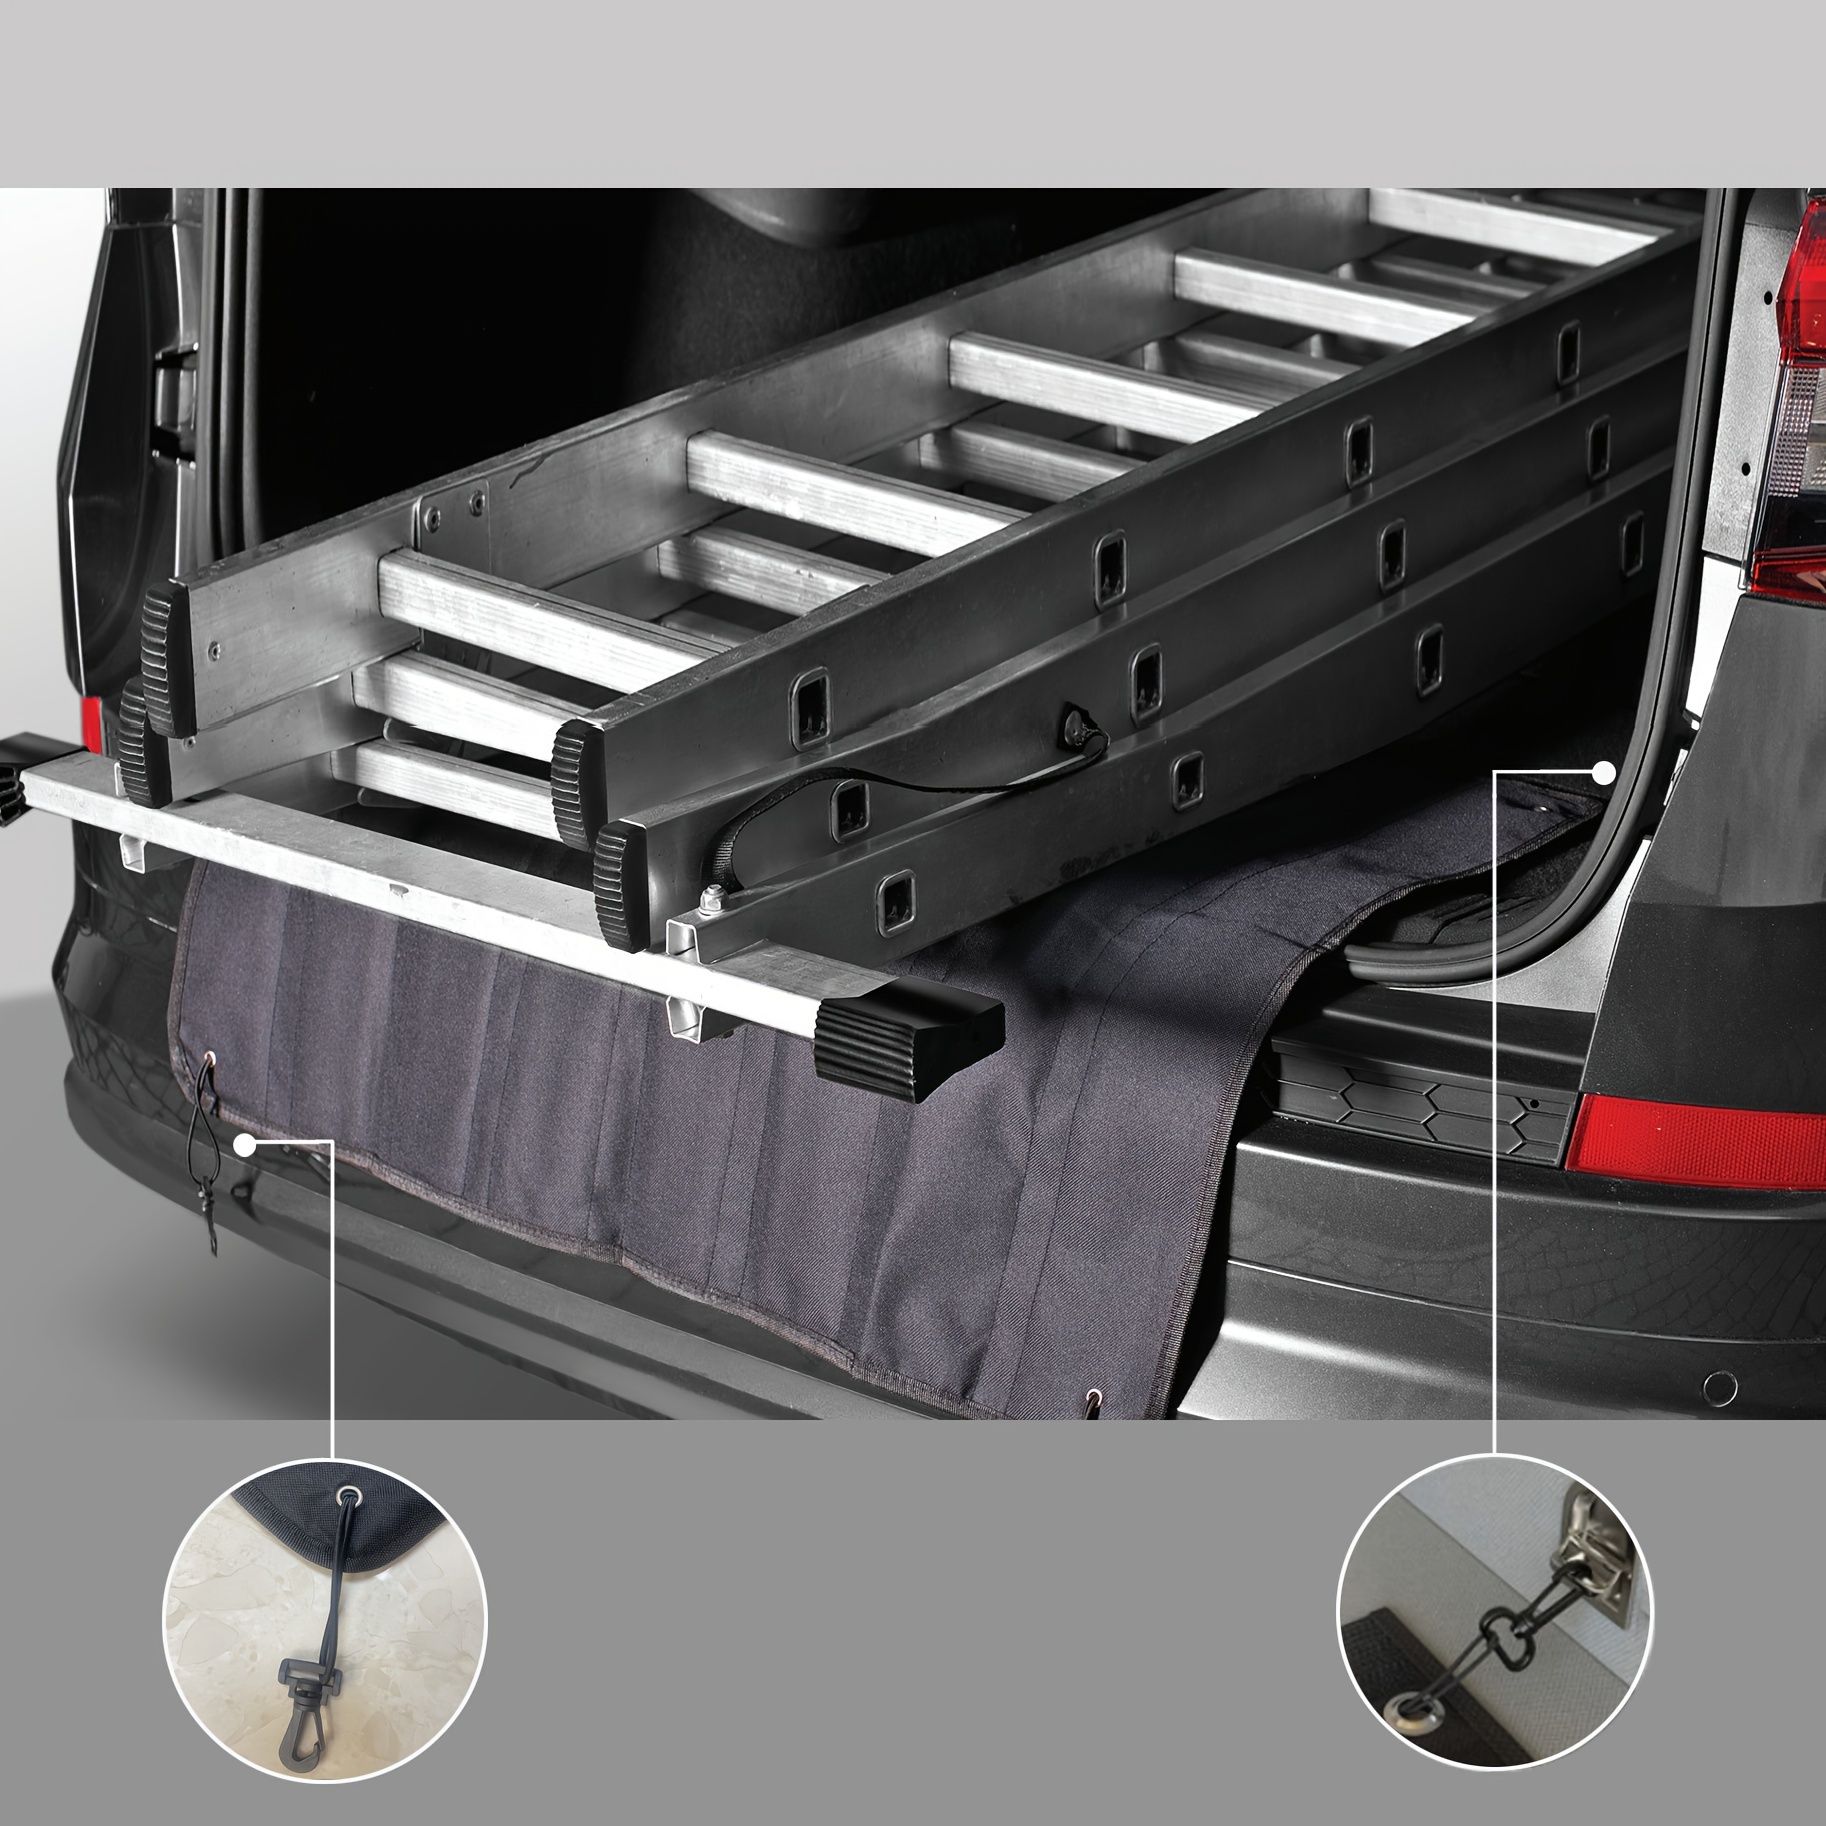 

Universal Car Bumper Protector Pad, Durable Fabric Material, Non-slip Anti-scratch Trunk Guard Mat For Pets And Cargo, Foldable Rear Bumper Protection Pad With Pearl Cotton And Drip Plastic Lining.